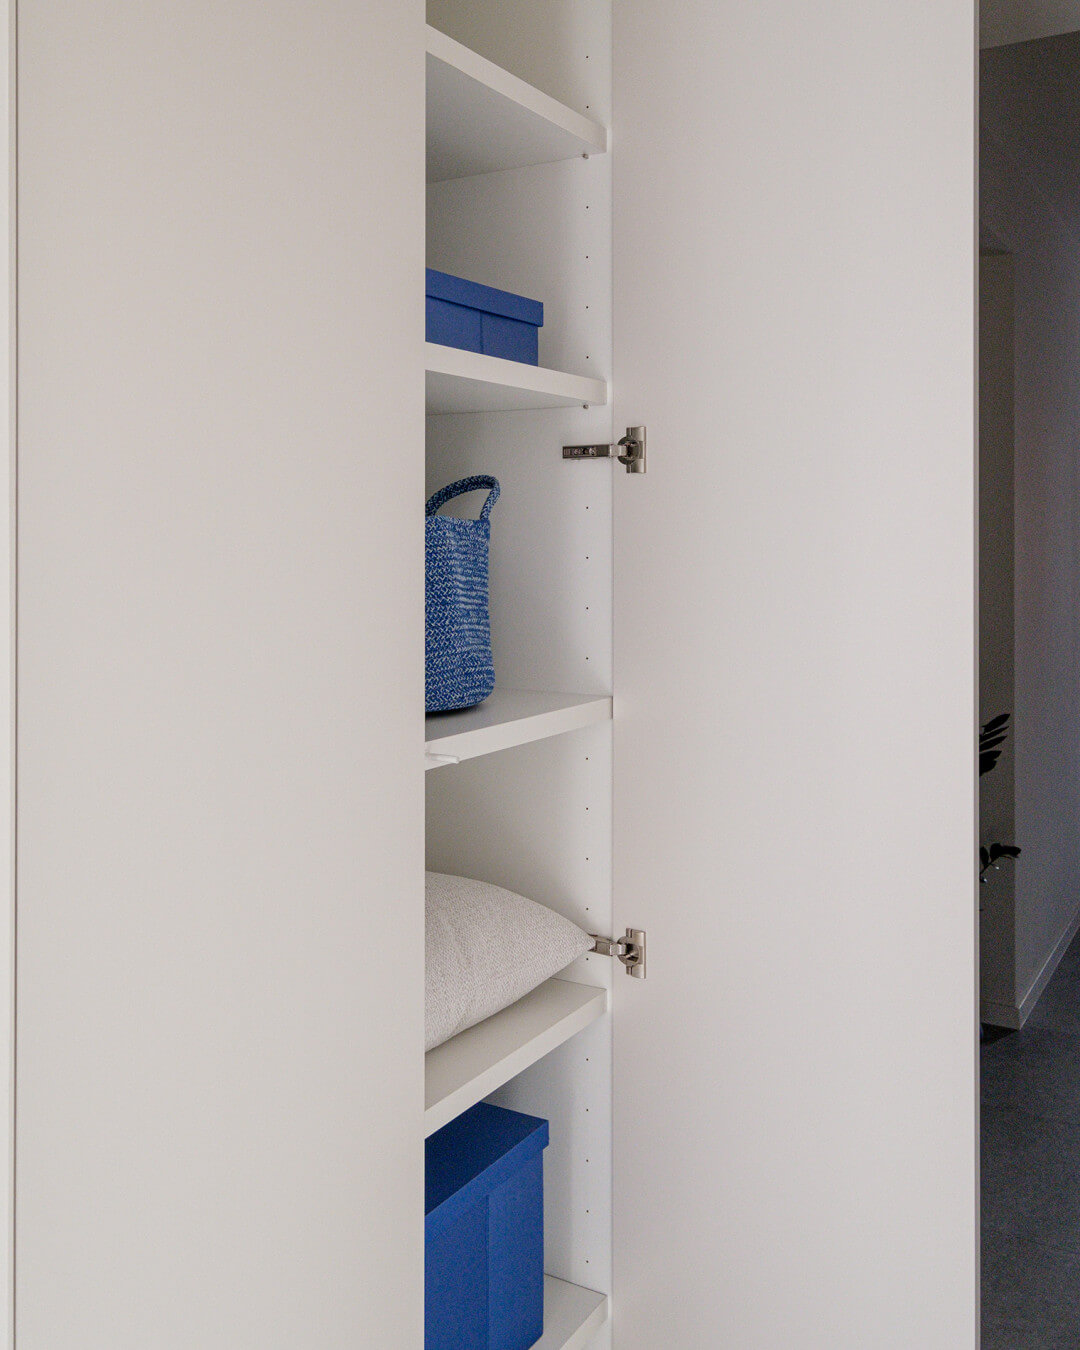 Detail of the extra thick shelves in the storage cabinet in the entrance hall of the Sundae House